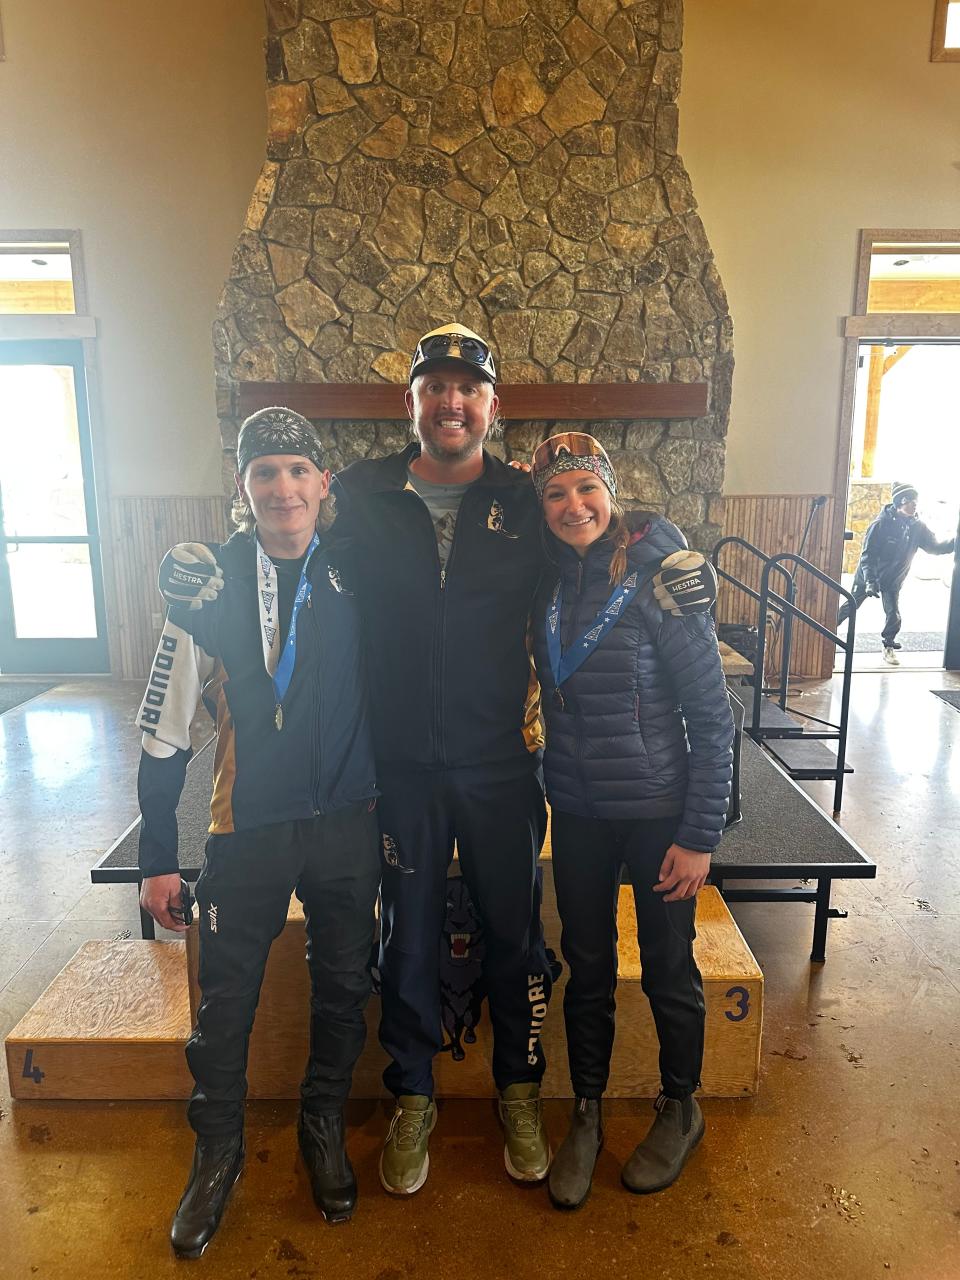 PSD Nordic ski coach Kyle Steitz (middle) stands with 5-kilometer skate podium finishers Cade Shortridge (left) and Clara Statkus (right) at the Colorado state Nordic ski championships on Thursday at YMCA of the Rockies Snow Mountain Ranch in Granby.